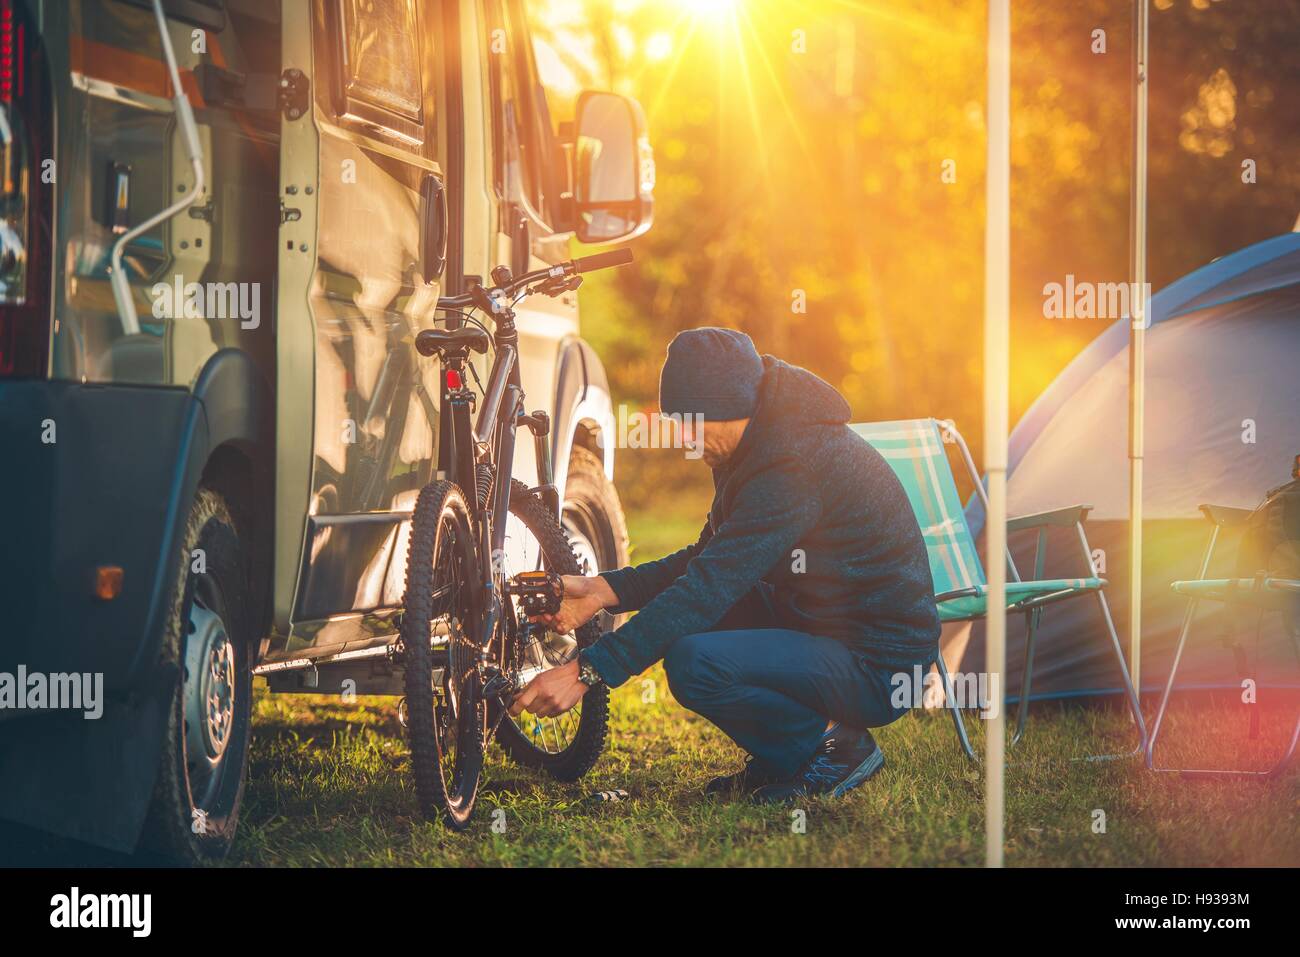 Fall Camping Time. Motorhome and Tent Camping. Men Preparing His Mountain Bike For a Trip. Stock Photo